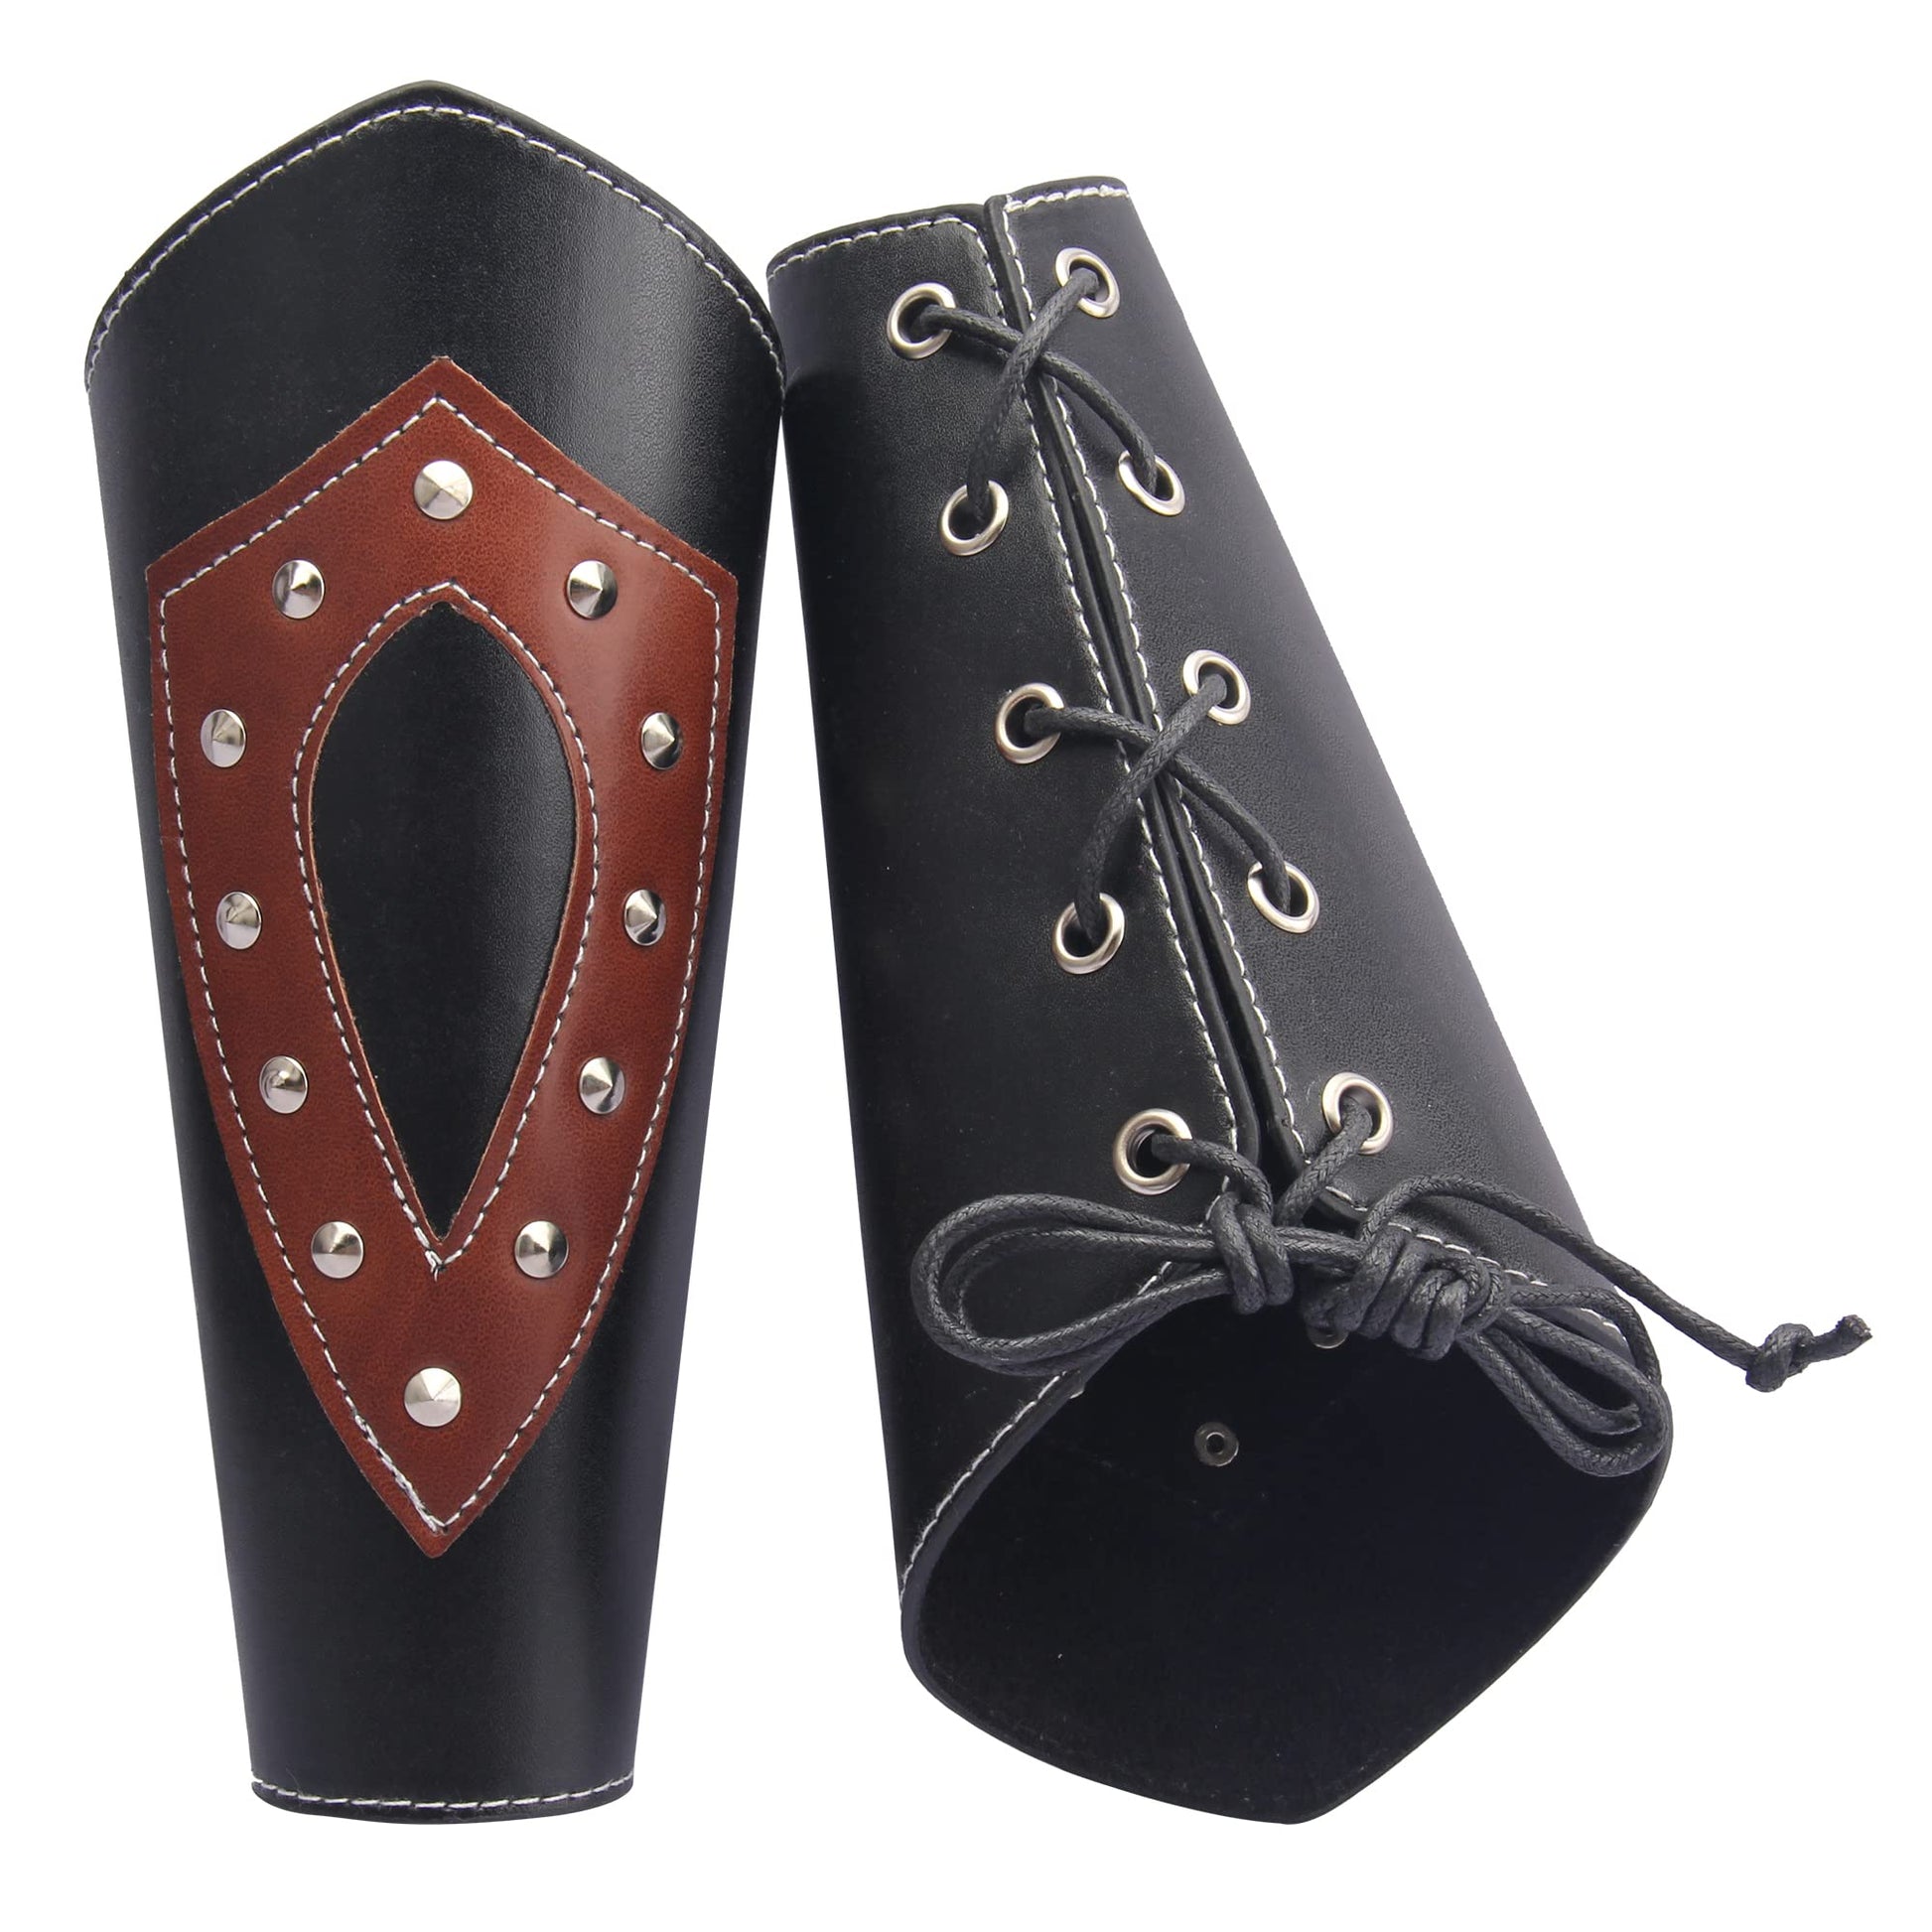 Samurai Leather Bracers, Larp or Cosplay Leather and Metal Pair of Bracers  for Fantasy Cosplay, Accurate Replica. 